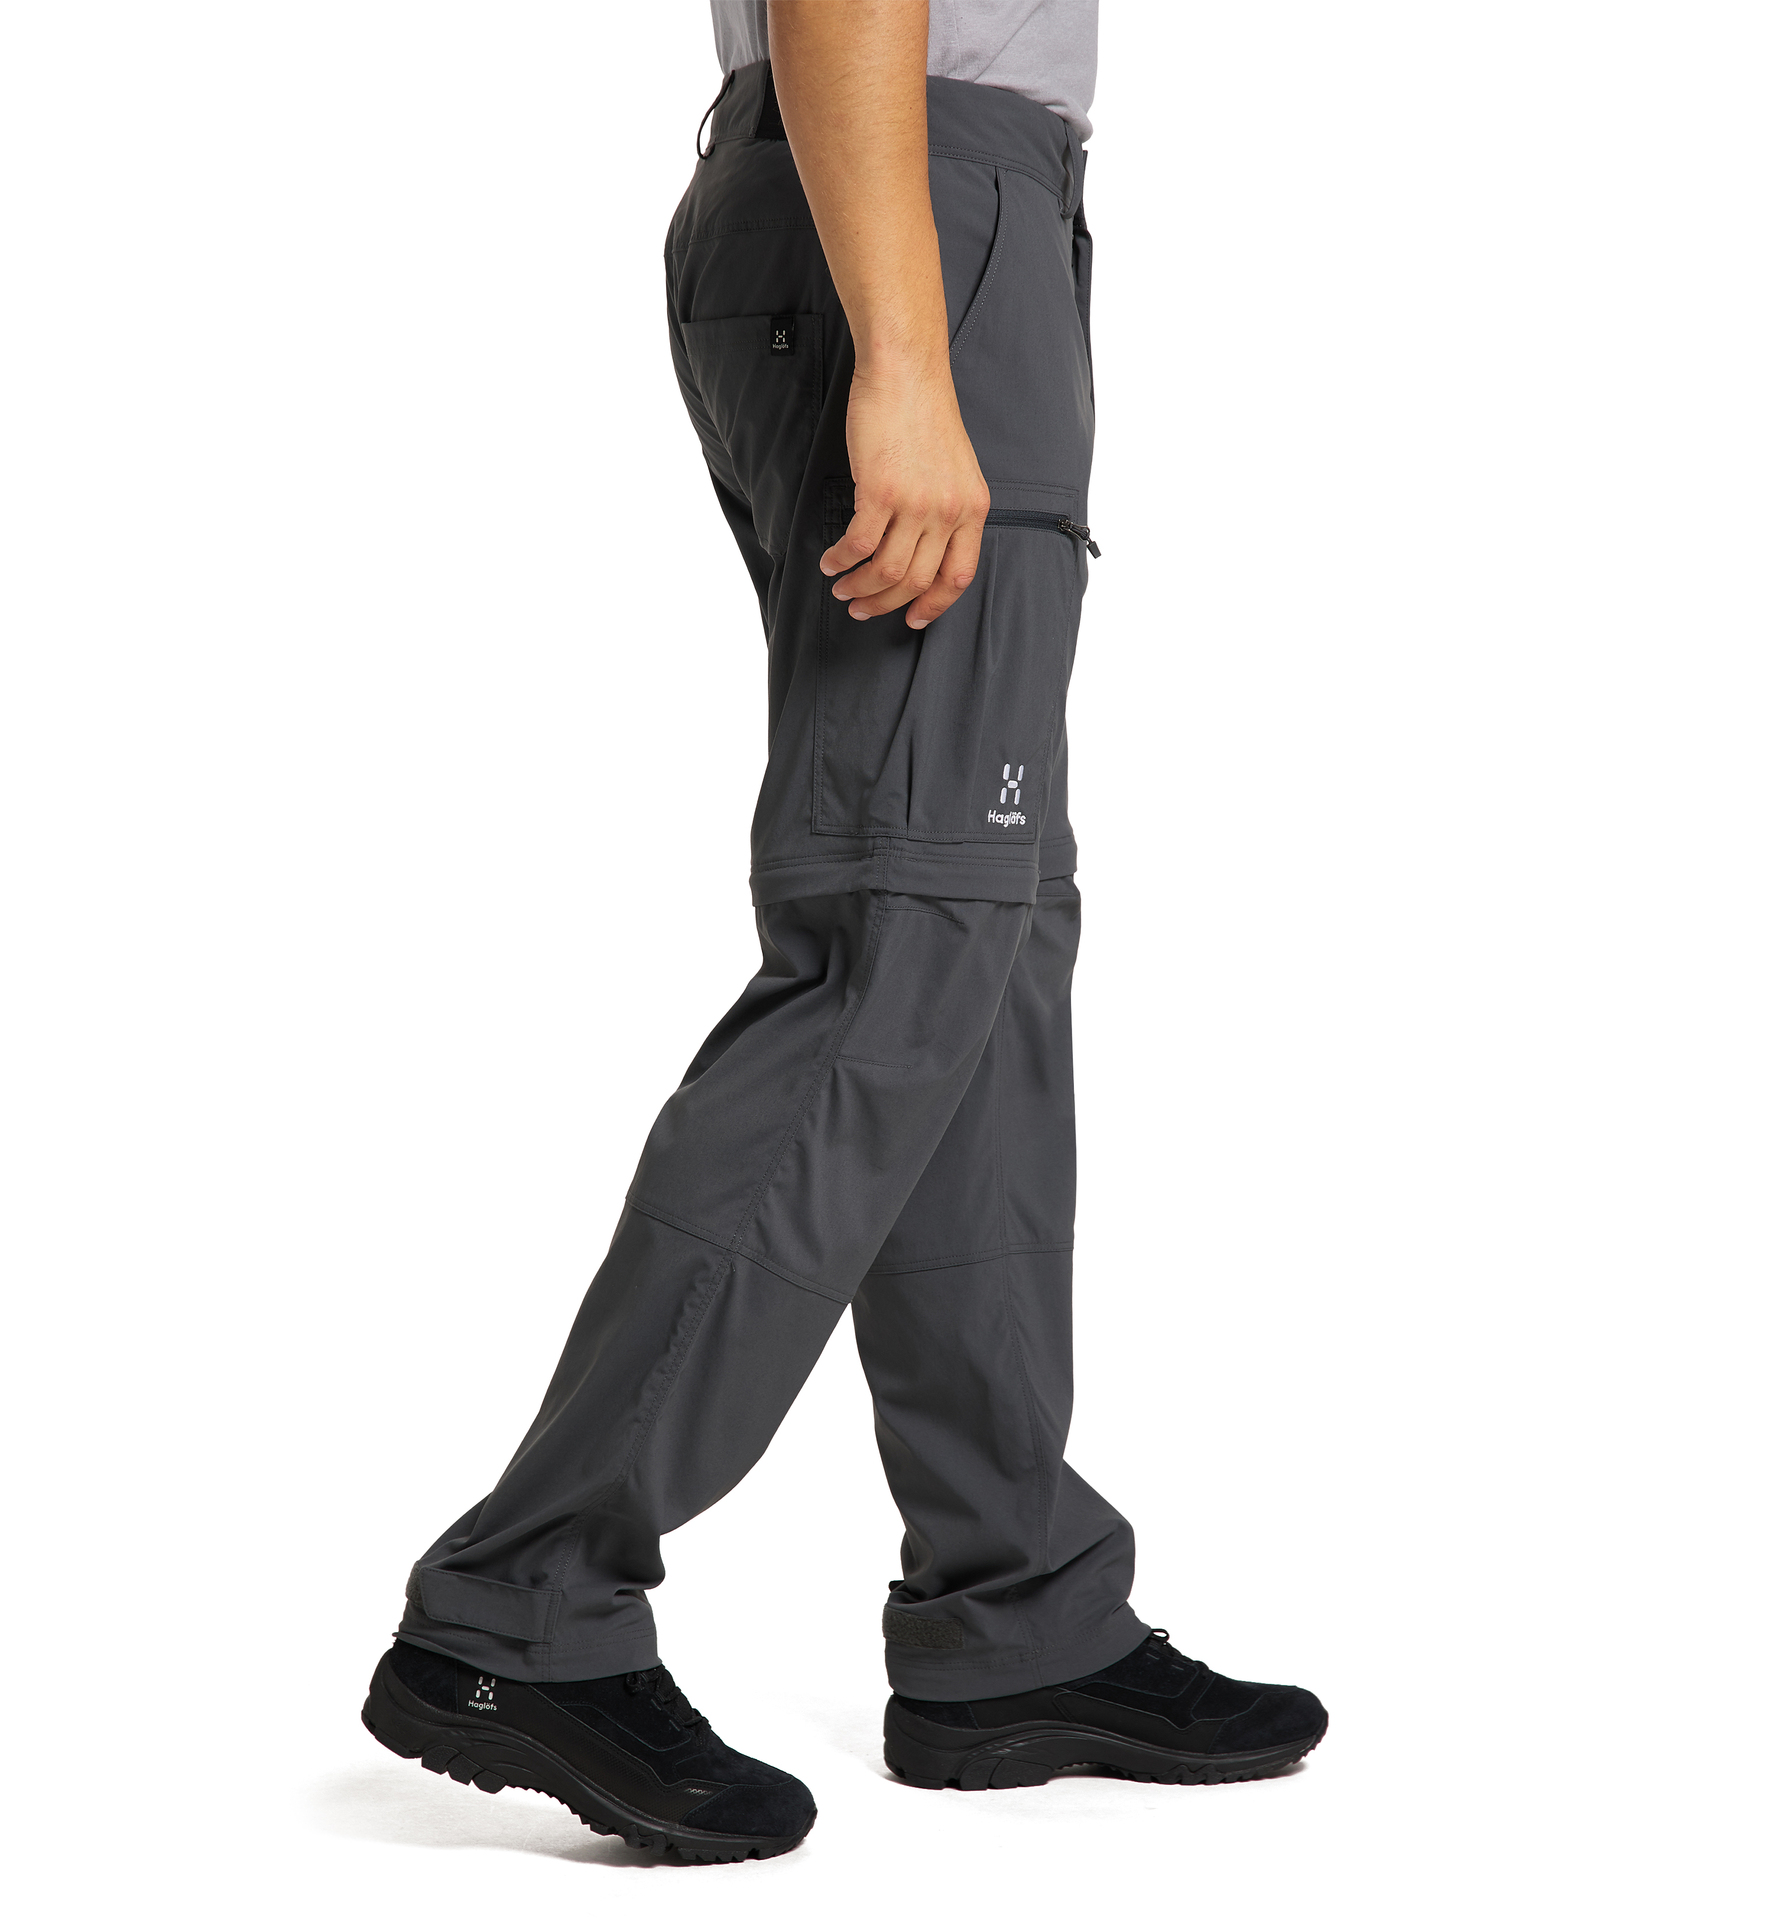 Men's 2 in 1 Pant ACTIVE STRETCH ZIP-OFF M - camel - 2 in 1 pant